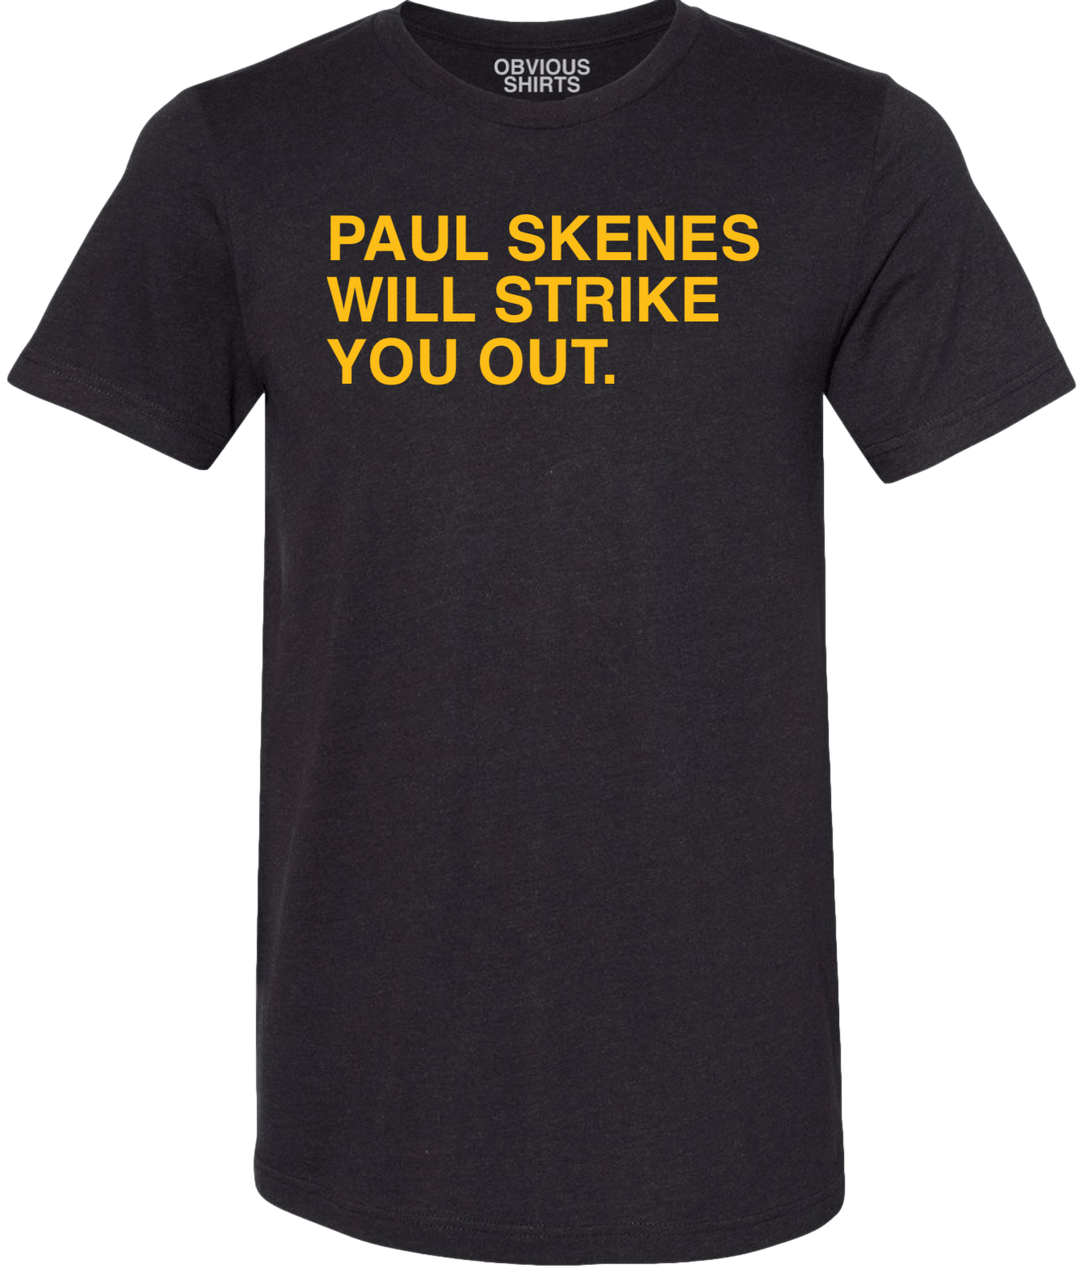 PAUL SKENES WILL STRIKE YOU OUT. - OBVIOUS SHIRTS